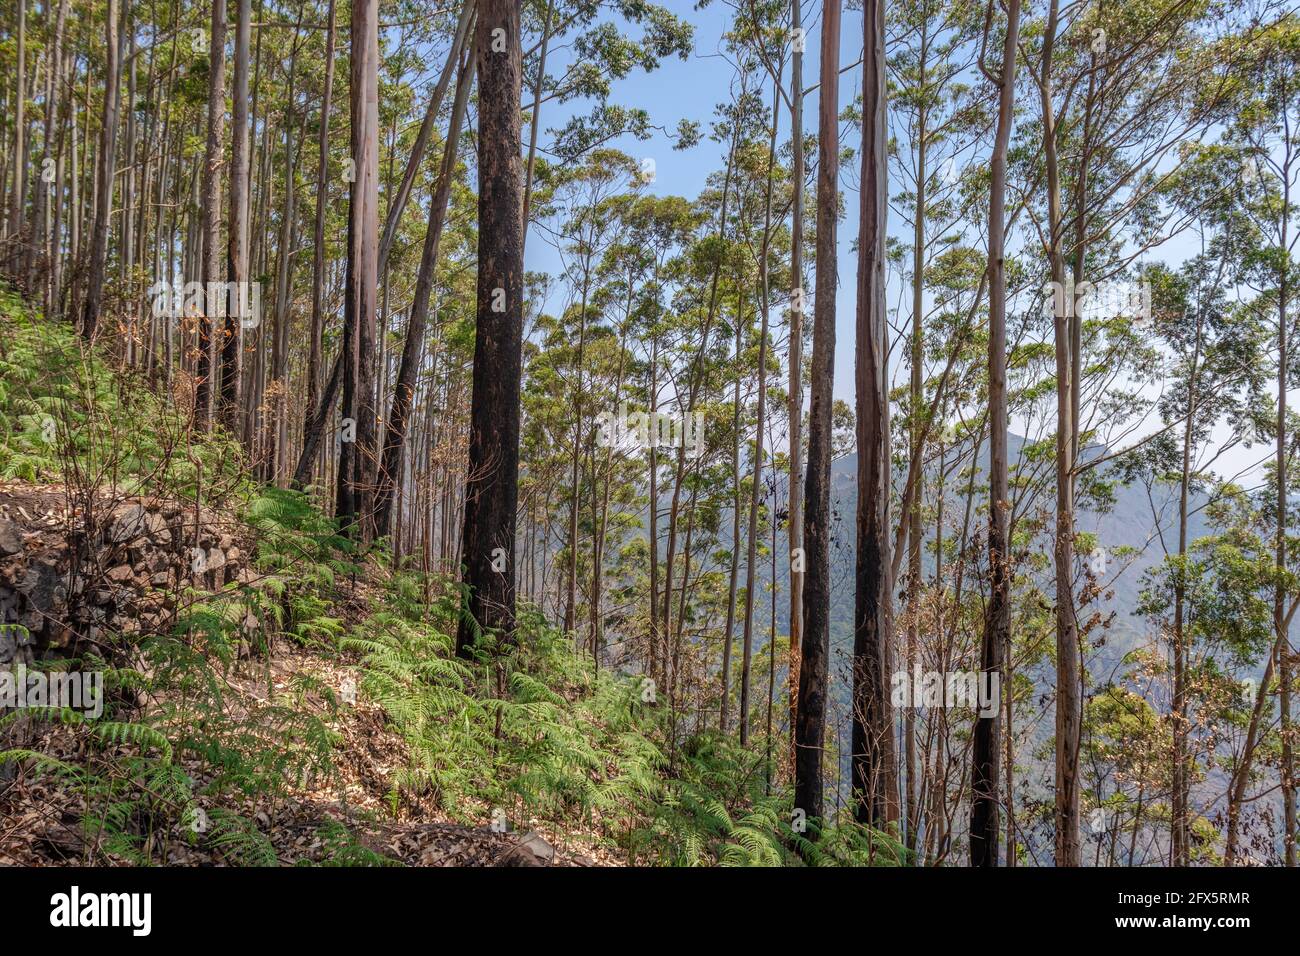 Forest view with blue sky is taken at Dolphine nose kodaikanal tamilnadu india. Stock Photo